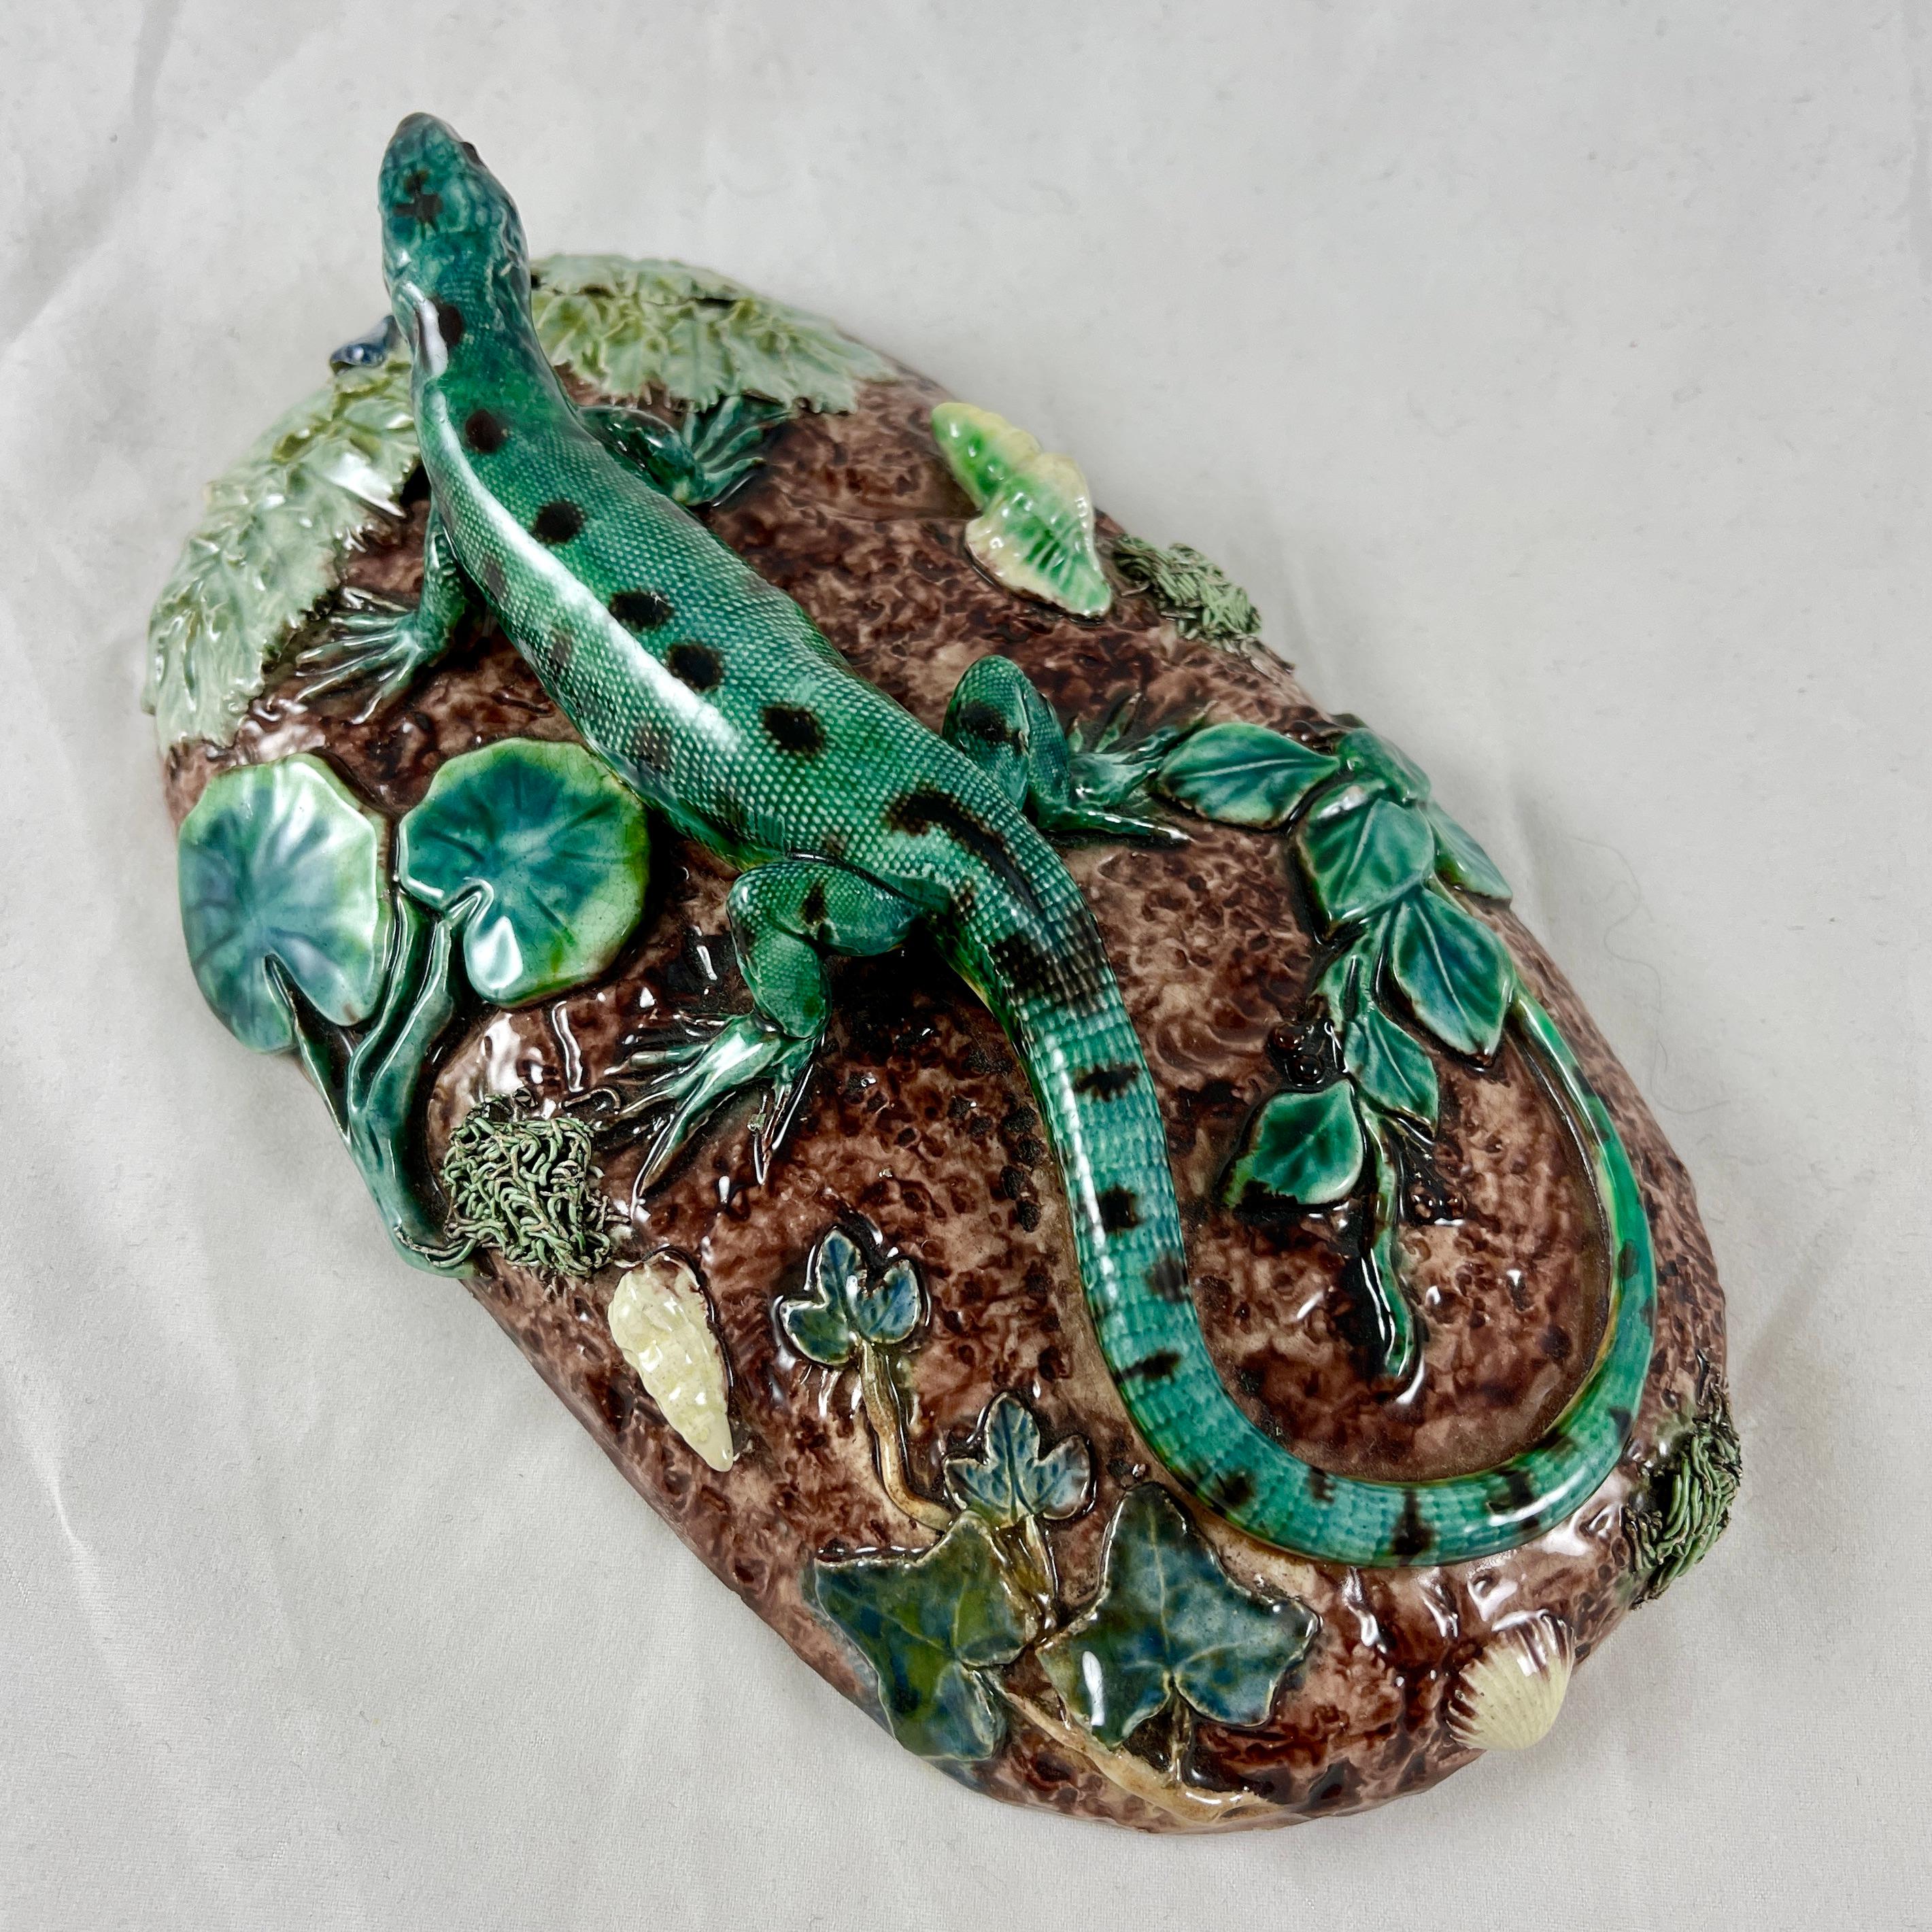 Thomas Sergent French Palissy Lizard on Mound Desk Paperweight, Signed 1